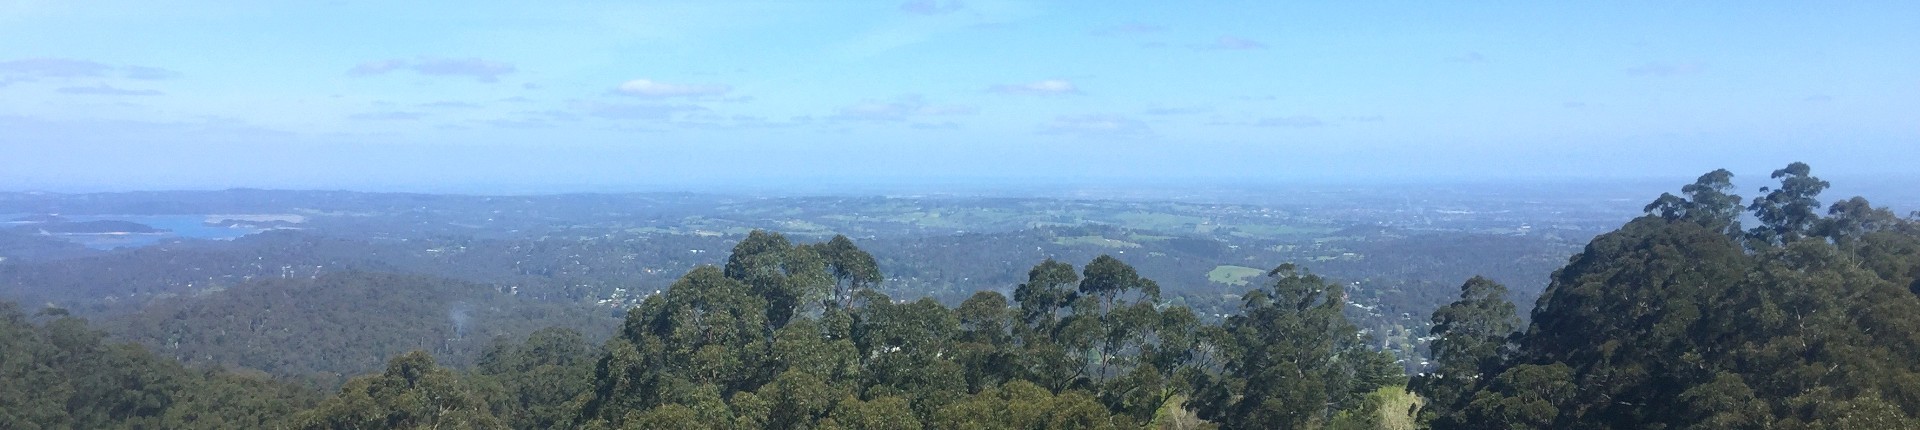 Forest and hills in Greater East Melbourne with view.